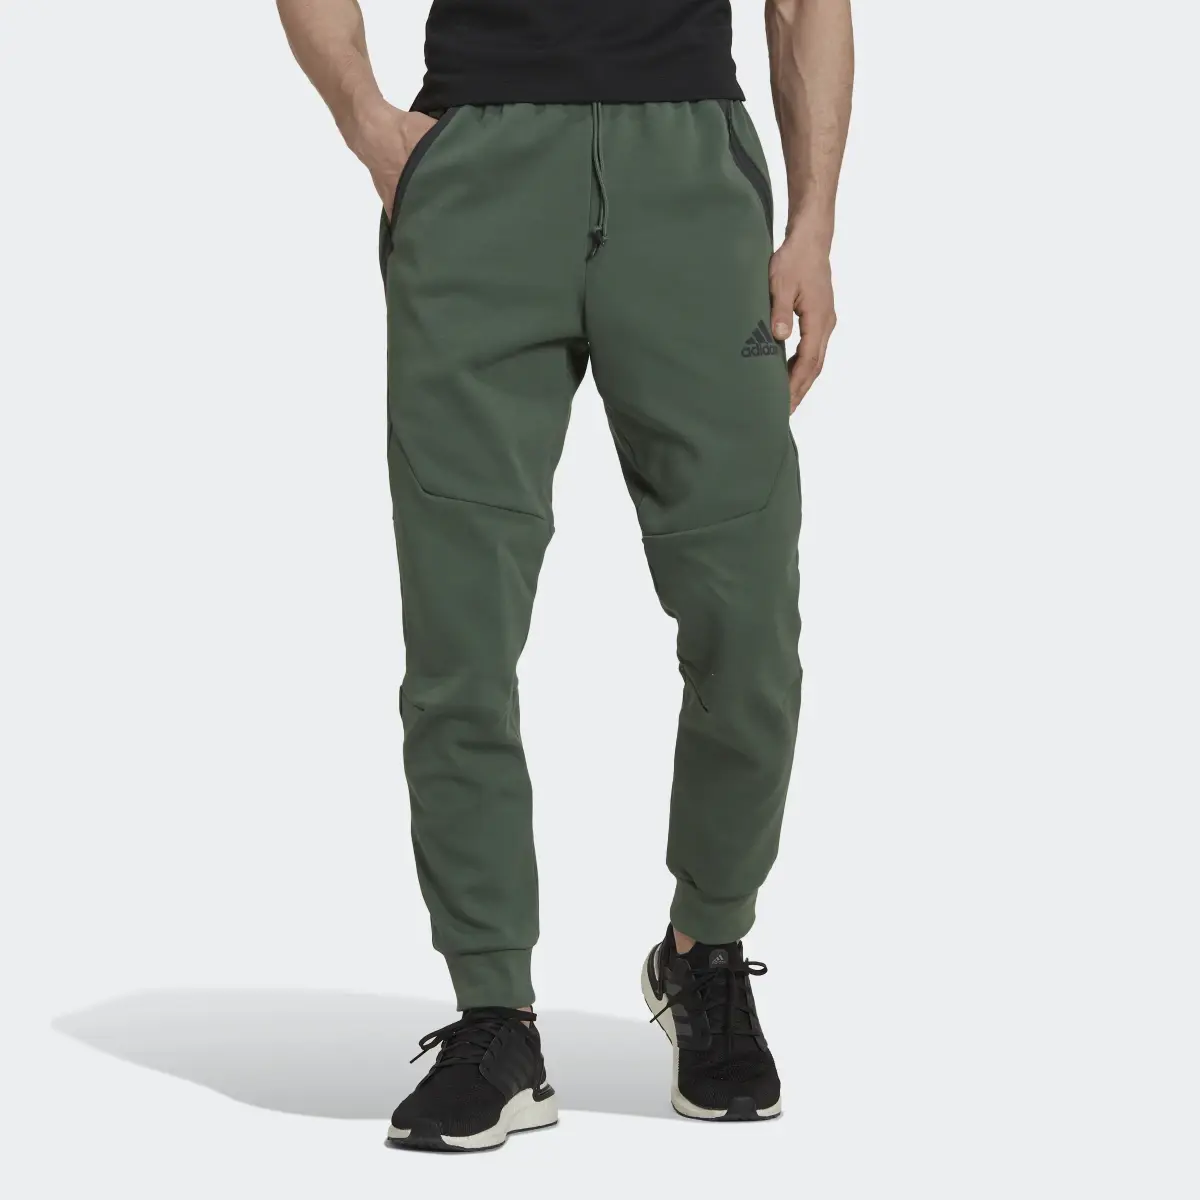 Adidas Designed for Gameday Joggers. 1